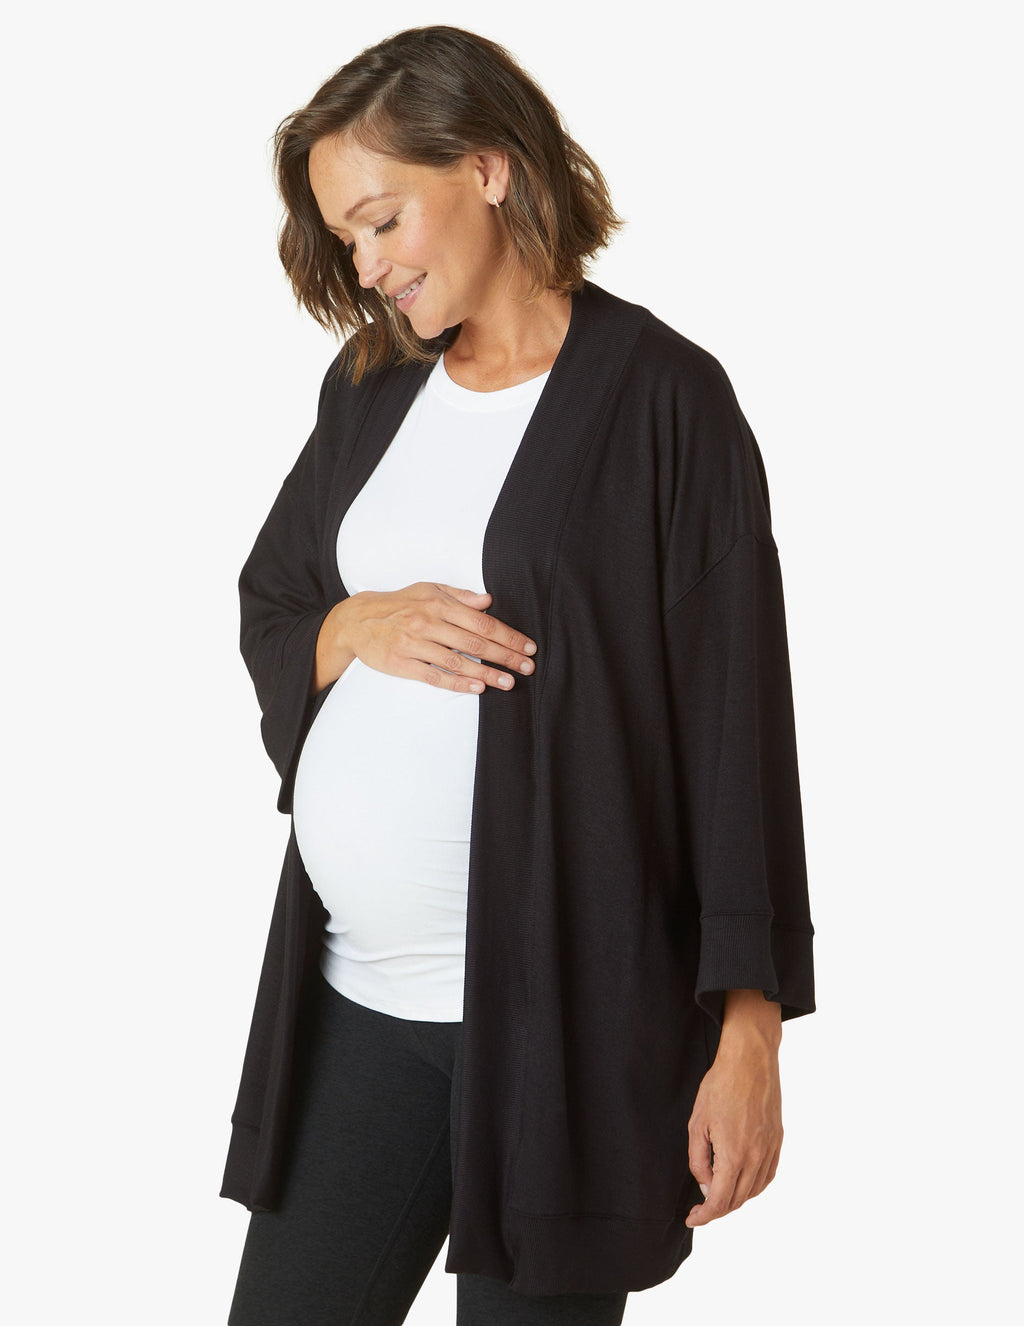 Open Mind Maternity Cardigan Featured Image